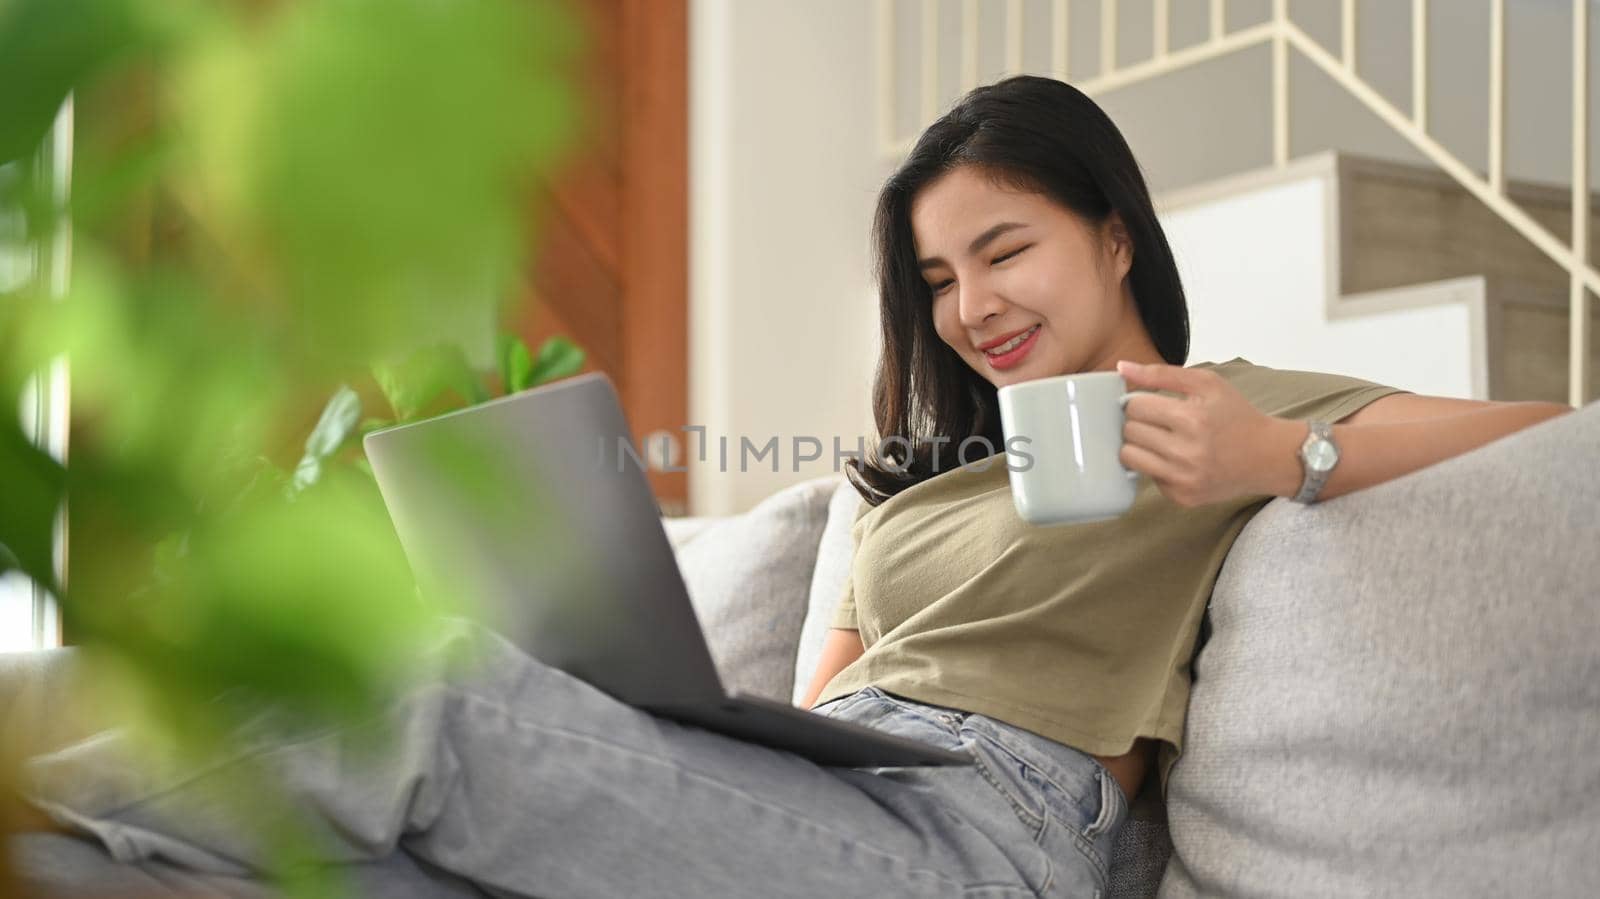 Joyful young woman browsing internet, chatting with friends on laptop computer by prathanchorruangsak